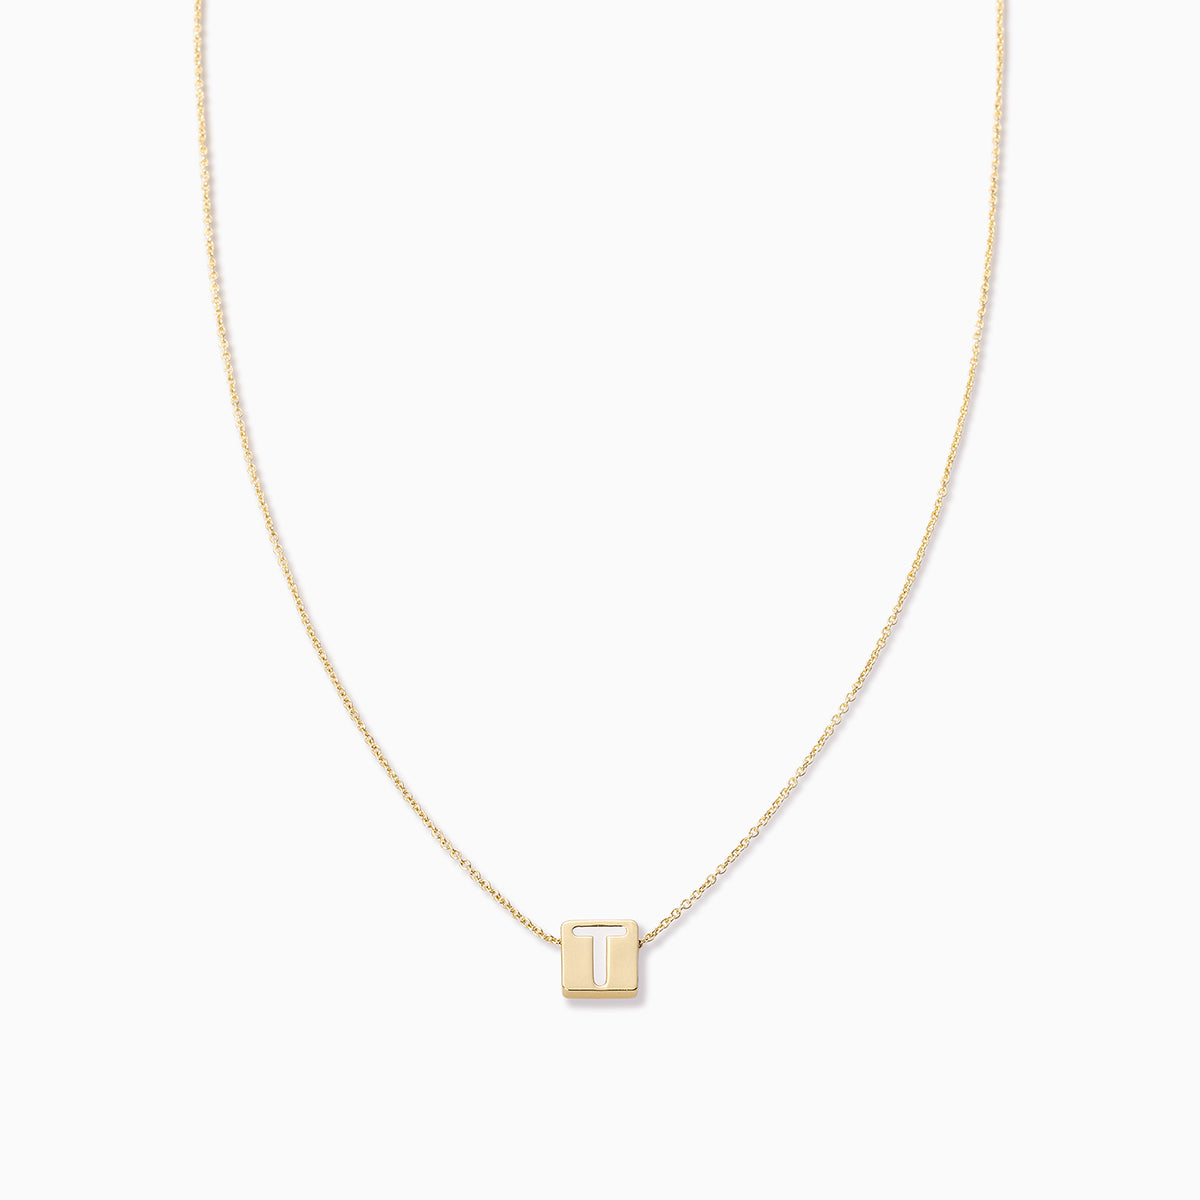 Bold Letter Necklace | Gold T | Product Image | Uncommon James